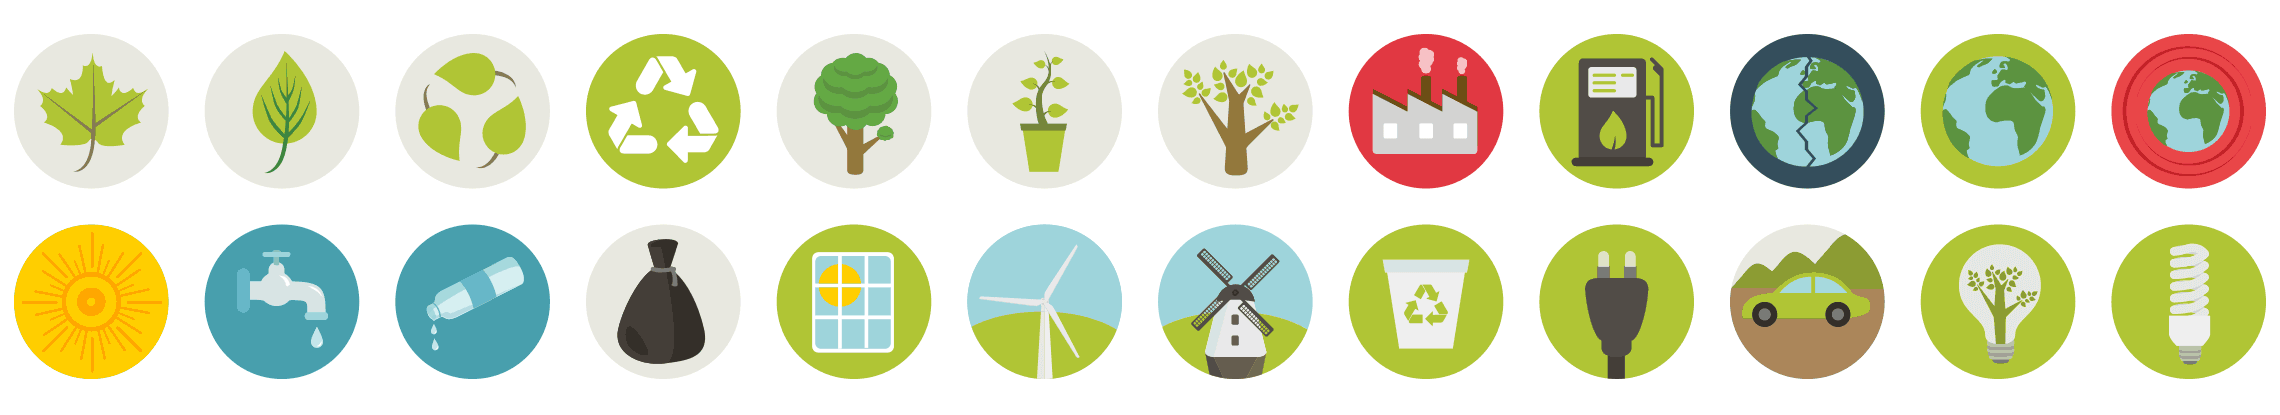 ecology-flat-icons-vol-1-preview